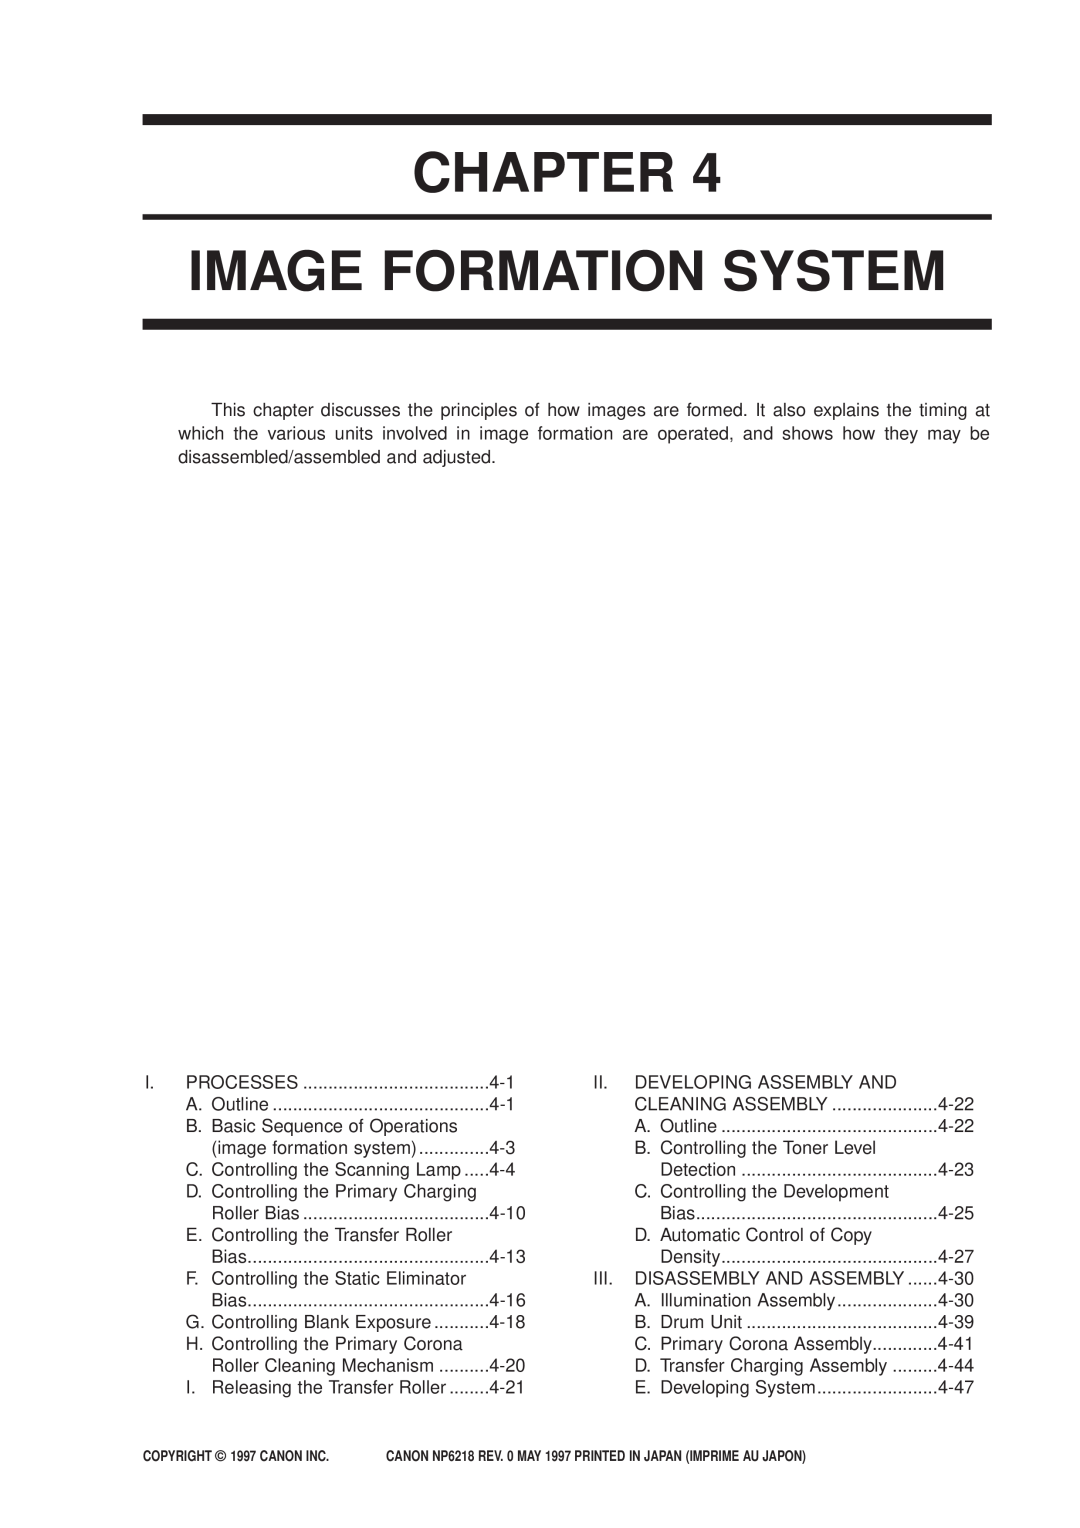 Canon NP6218, FY8-13EX-000 service manual Chapter Image Formation System 